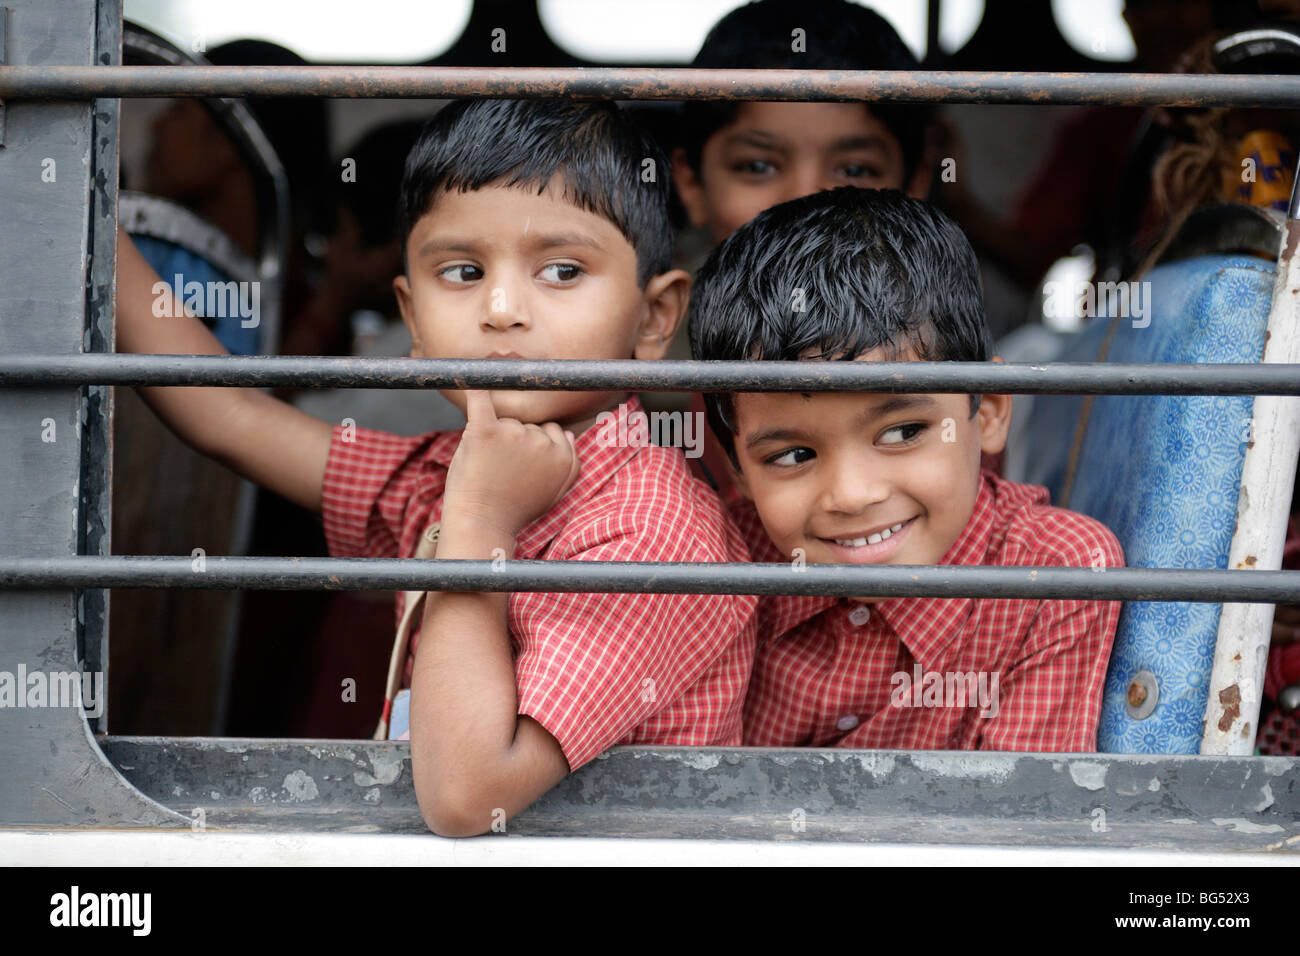 Pupils in a school bus, Tamil Nadu, India, Asia Stock Photo